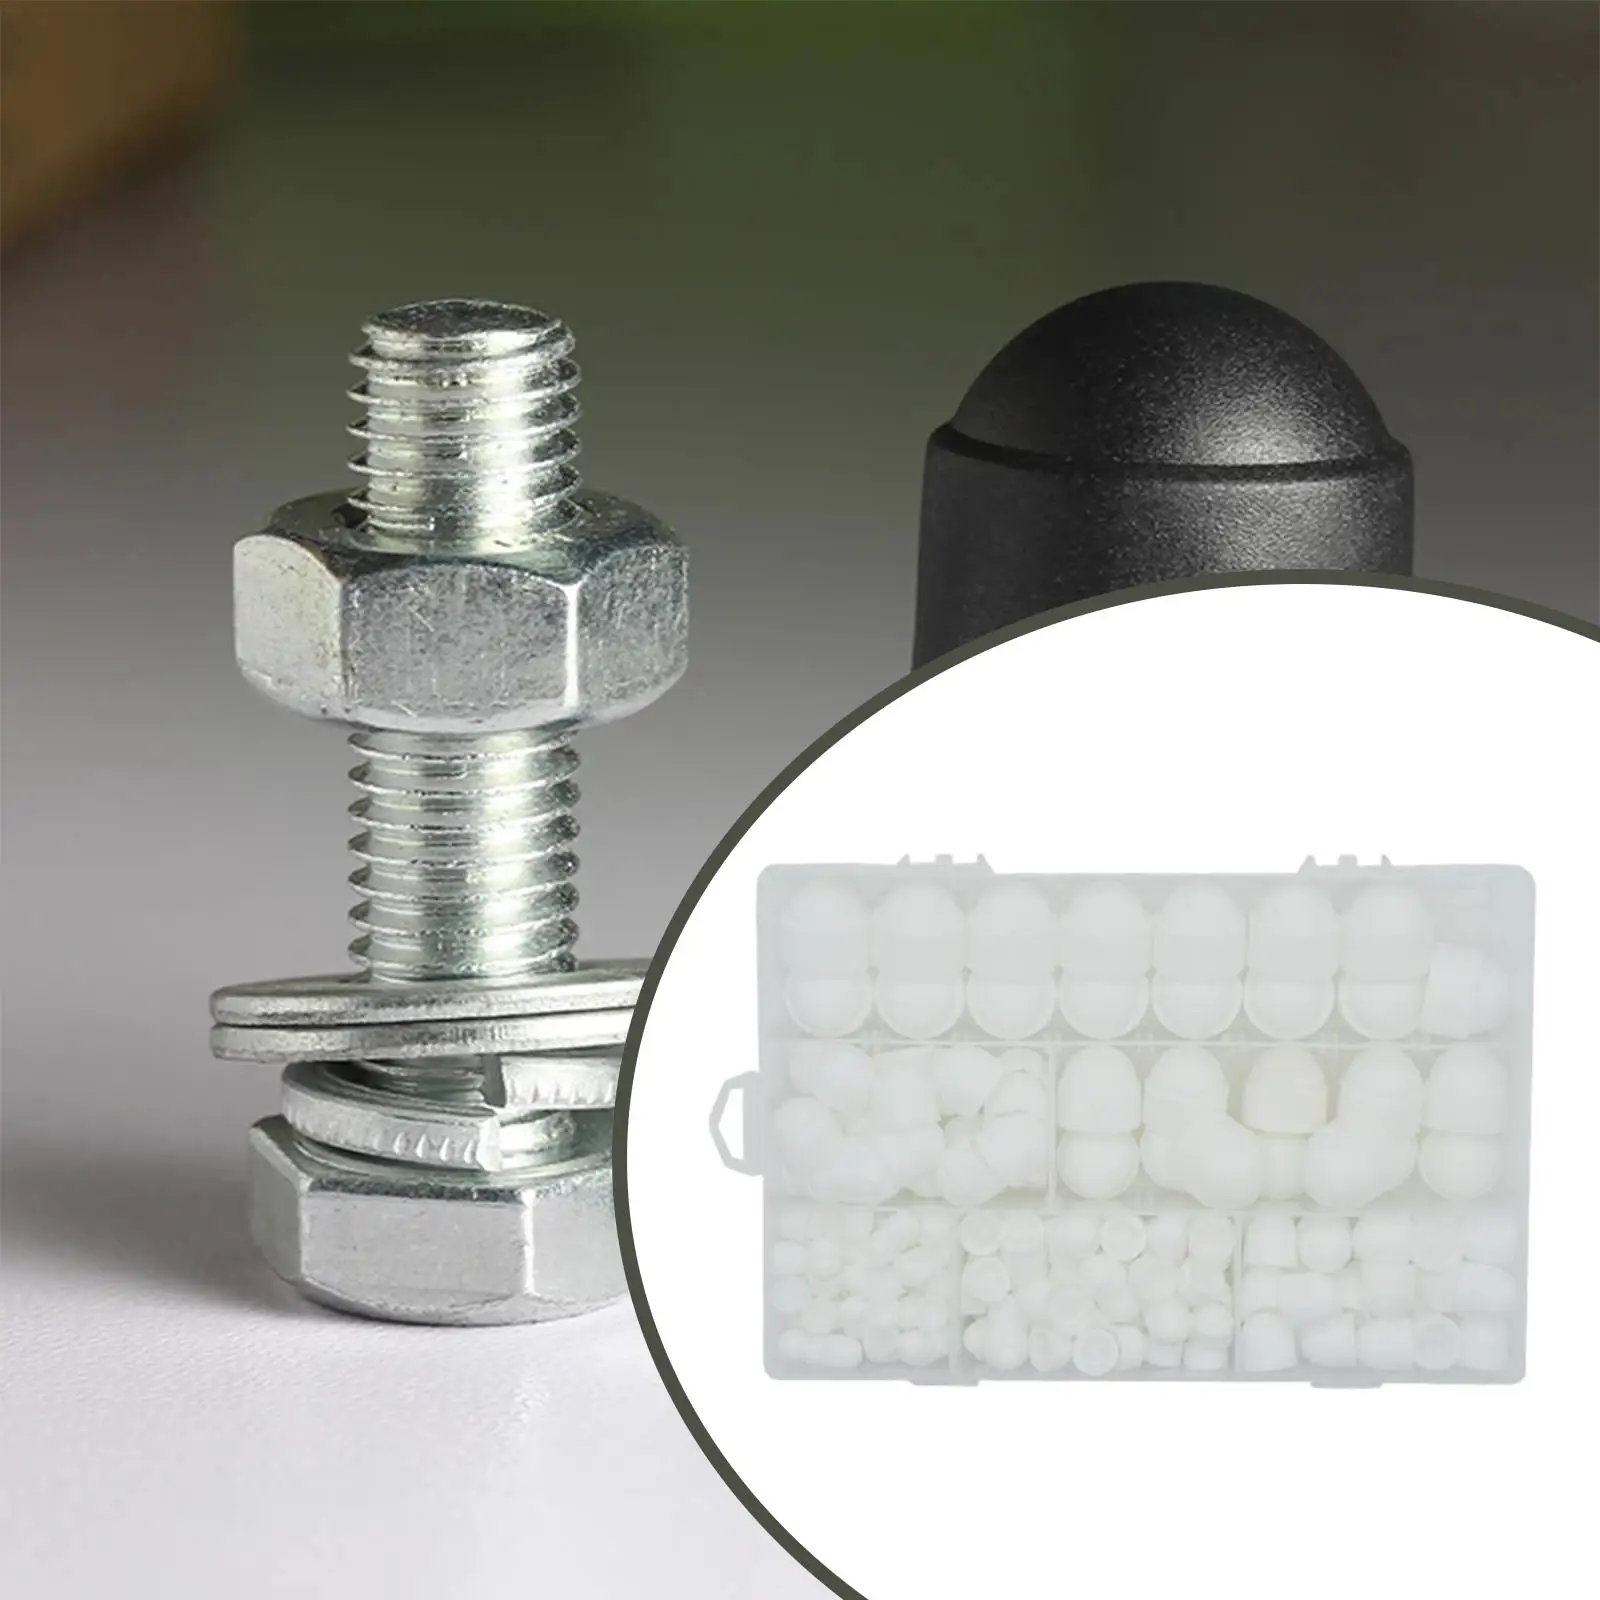 145Pcs M4-M12 Hexagon Nut Protection Cap Cover Screw Cover Caps Assortment Kits Easily to Install High performance White